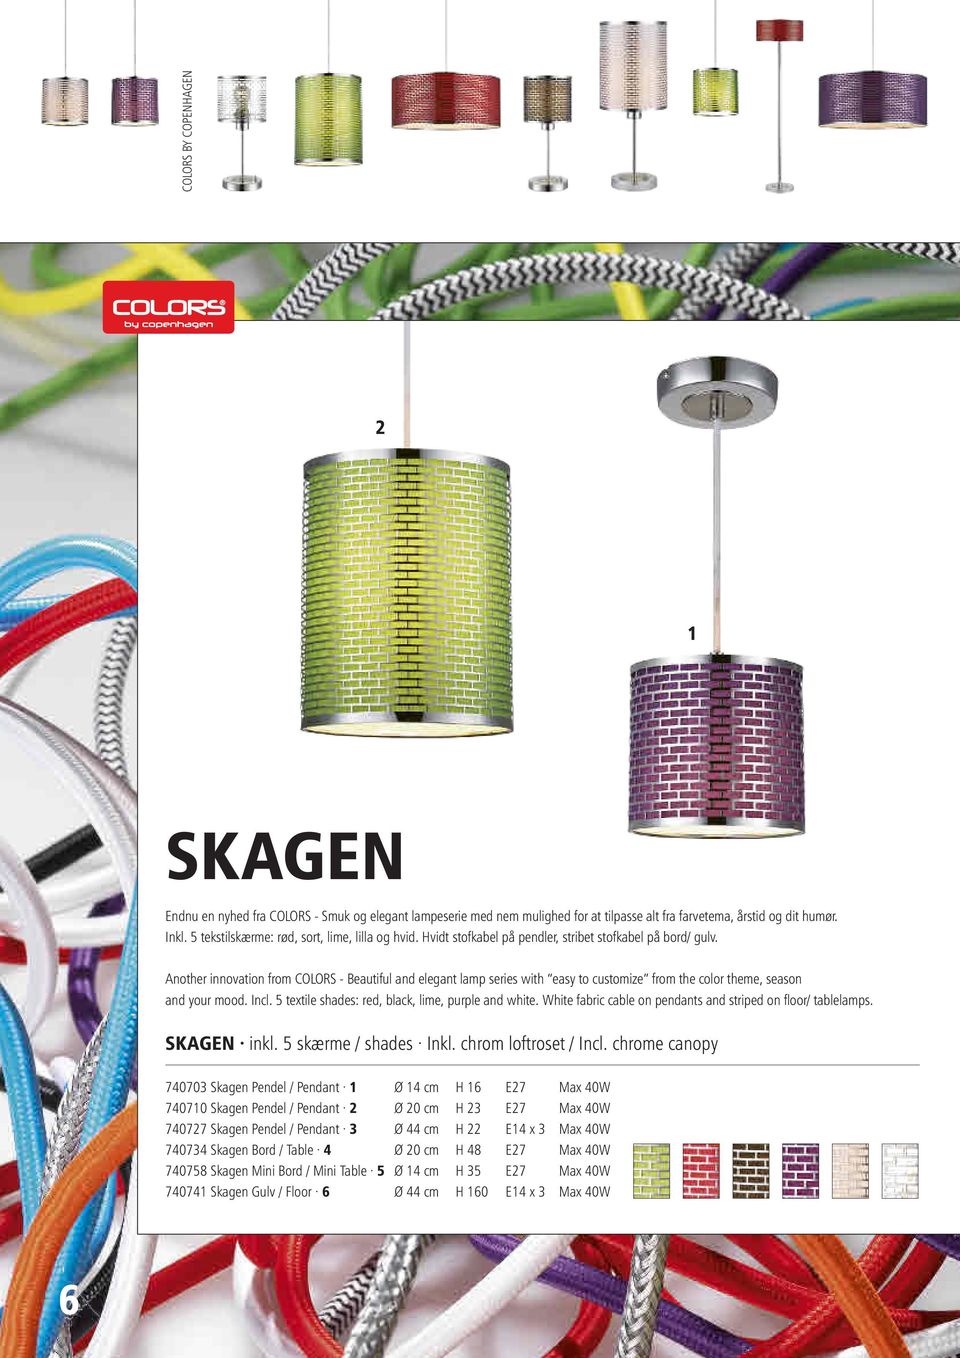 5 textile shades: red, black, lime, purple and white. White fabric cable on pendants and striped on floor/ tablelamps. SKAGEN inkl. 5 skærme / shades Inkl. chrom loftroset / Incl.